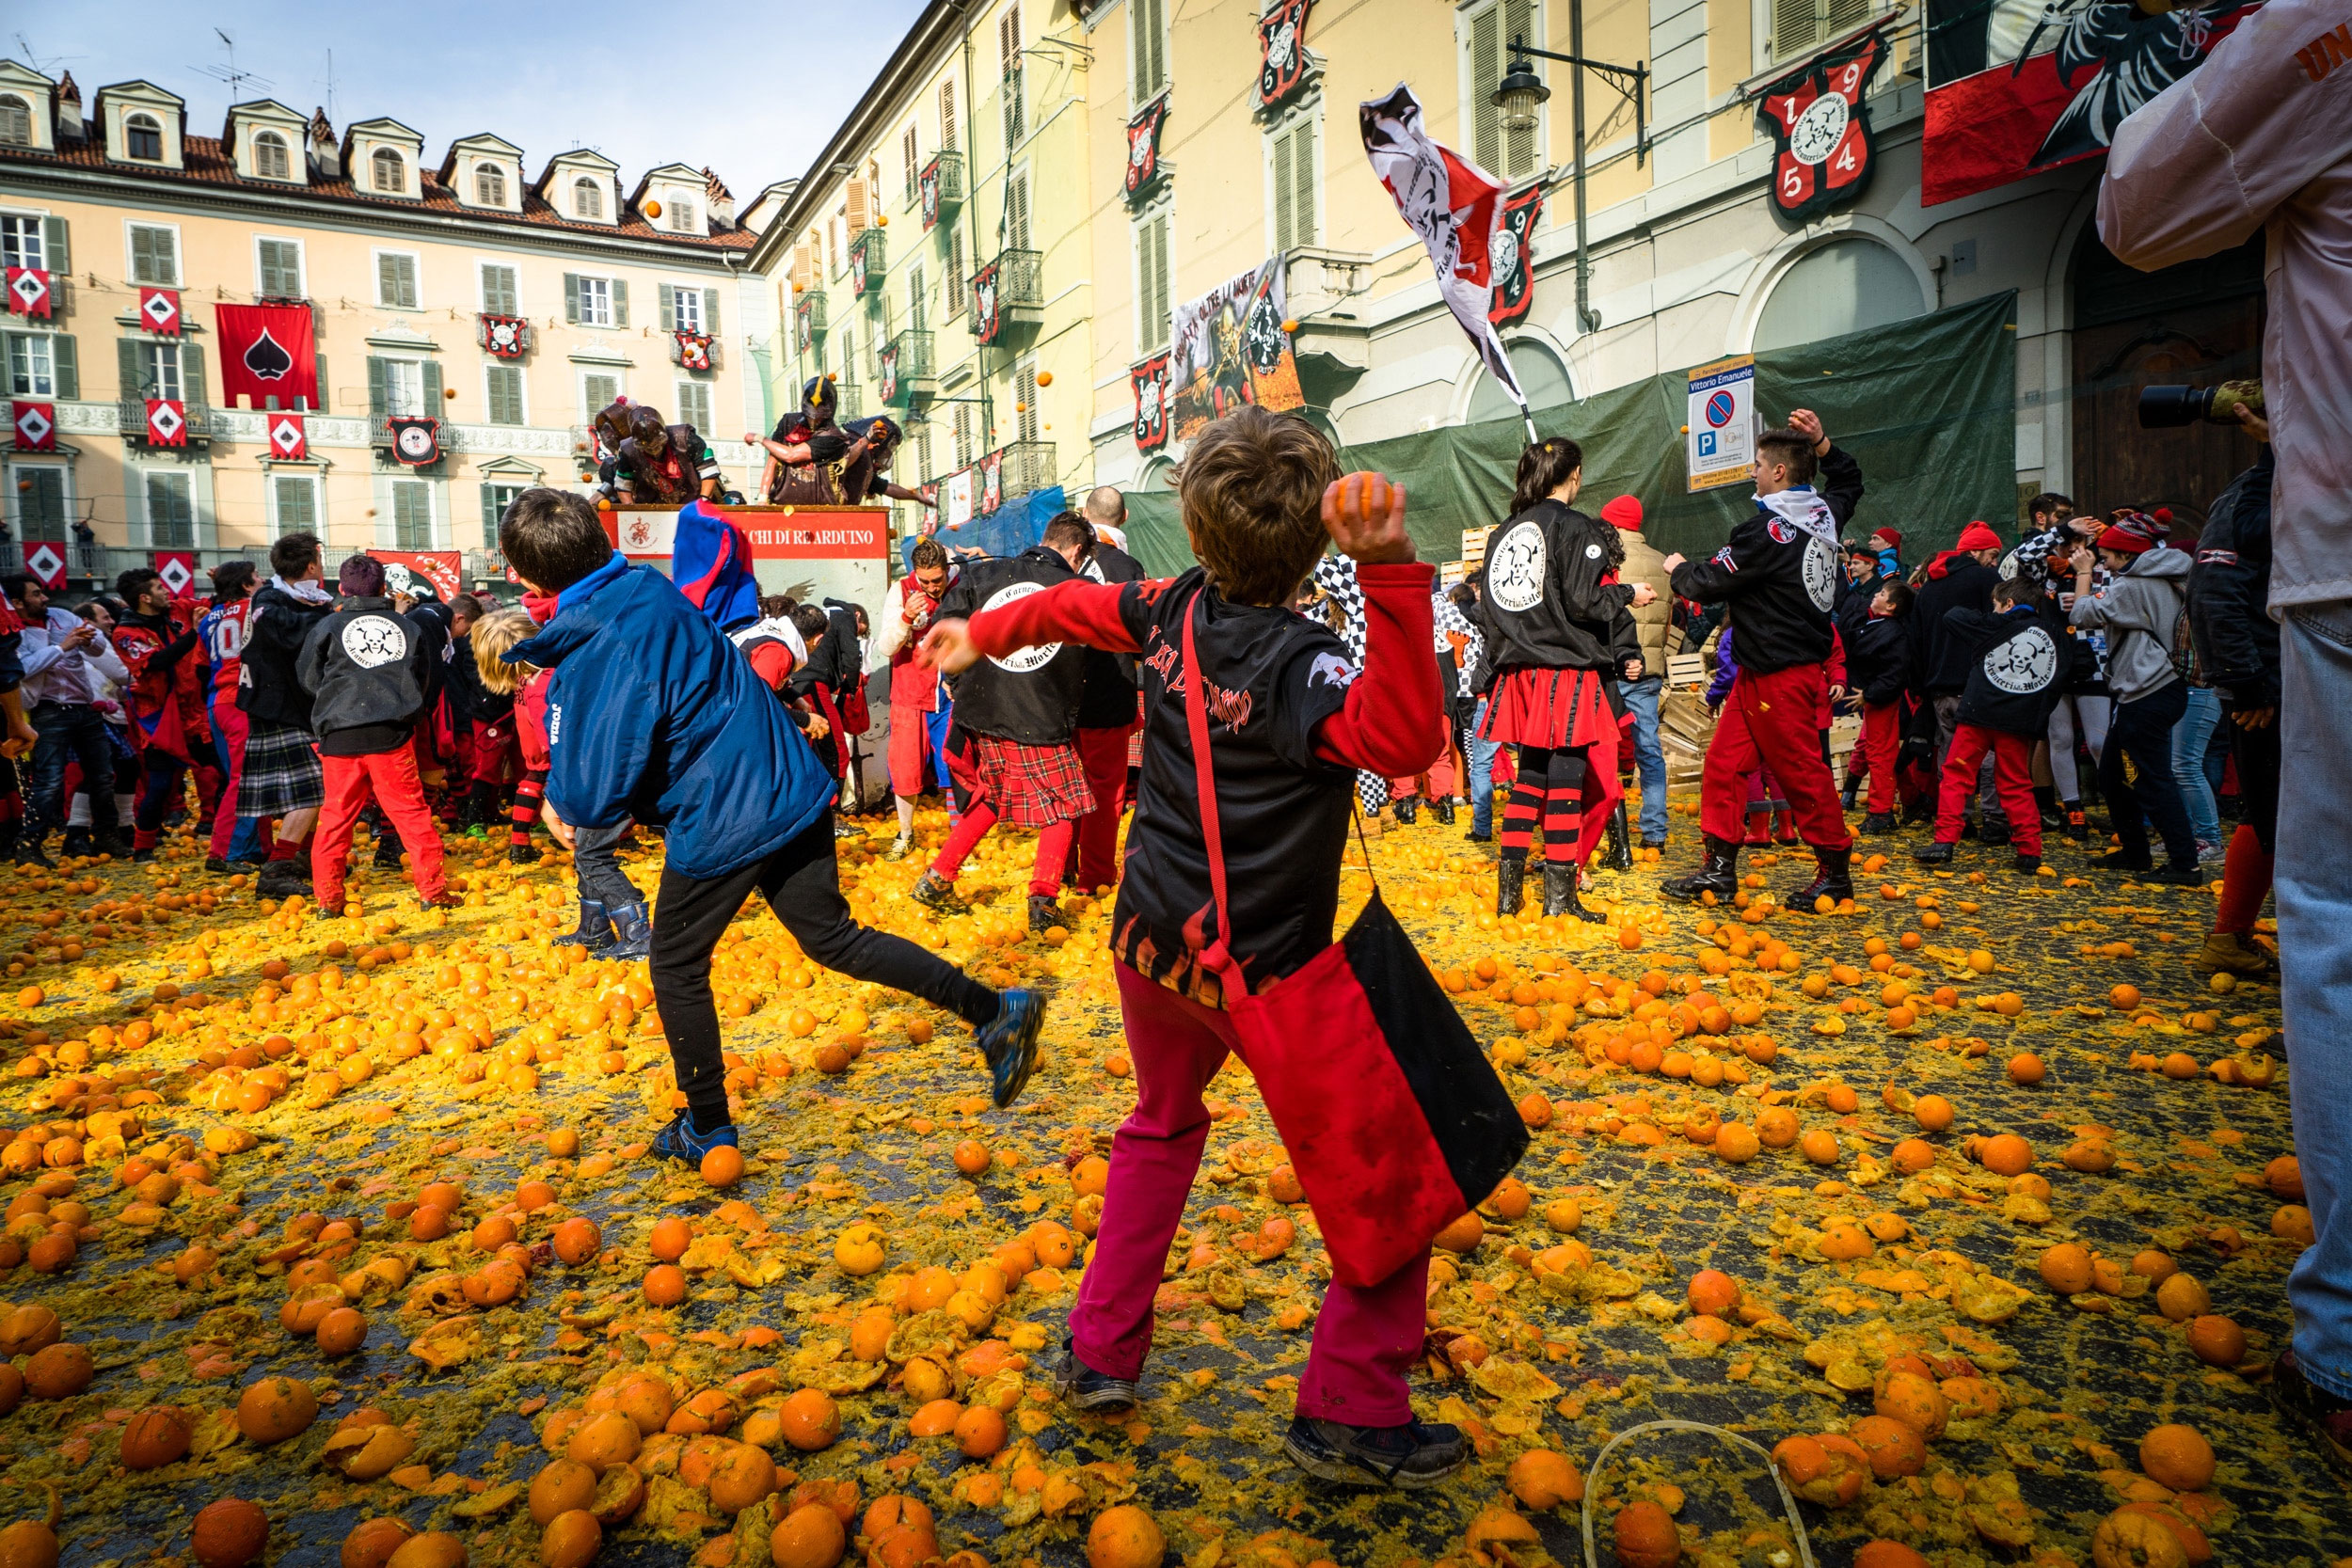 Carnevale: Food Traditions From Italy